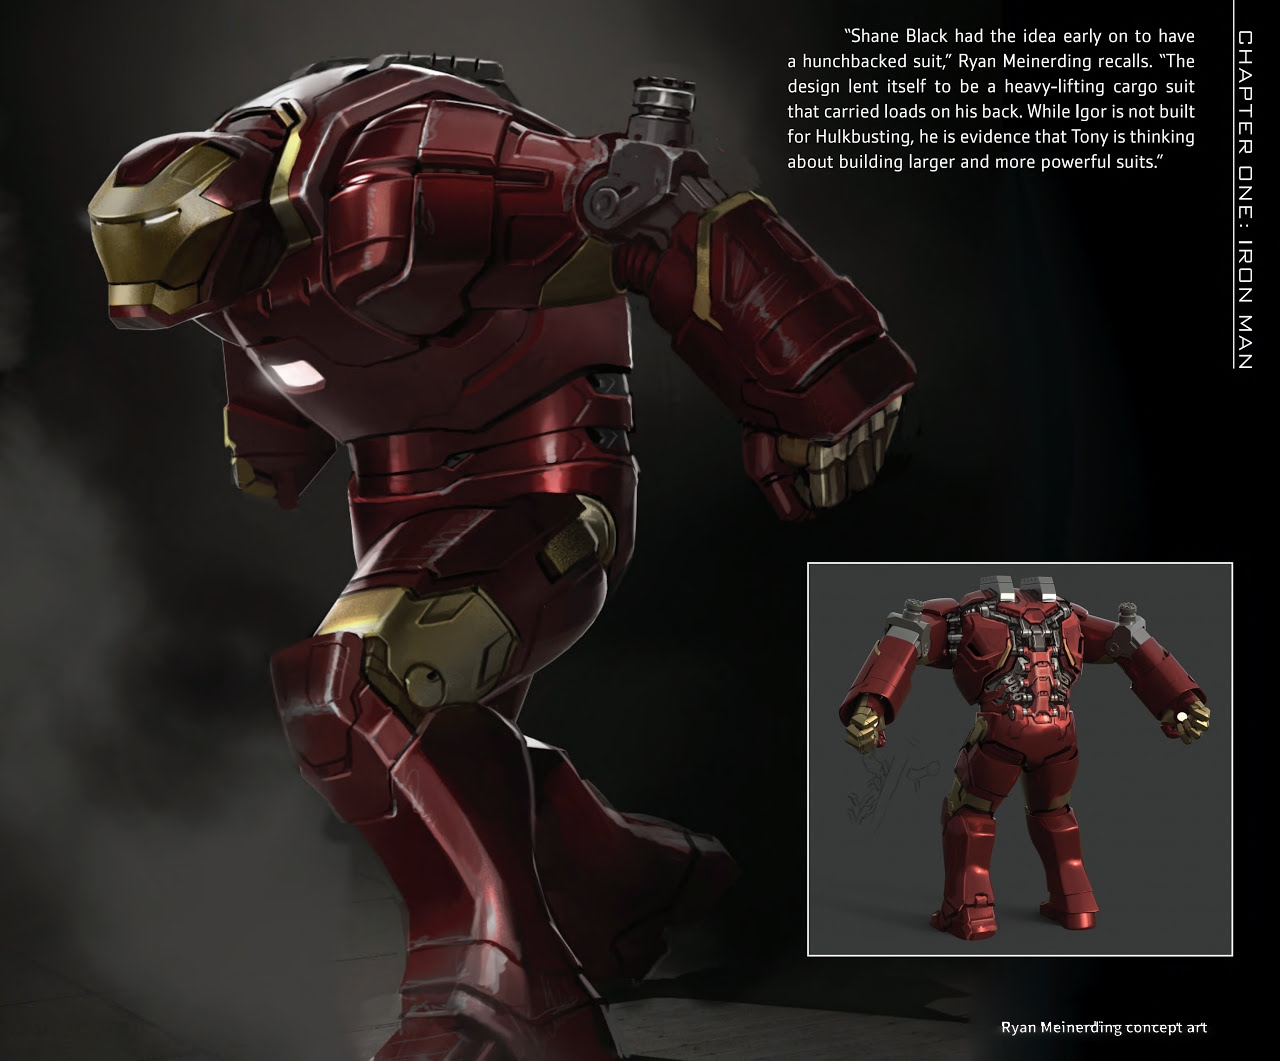 The Road to Marvel's Avengers Age of Ultron - The Art of the Marvel Cinematic Universe 69